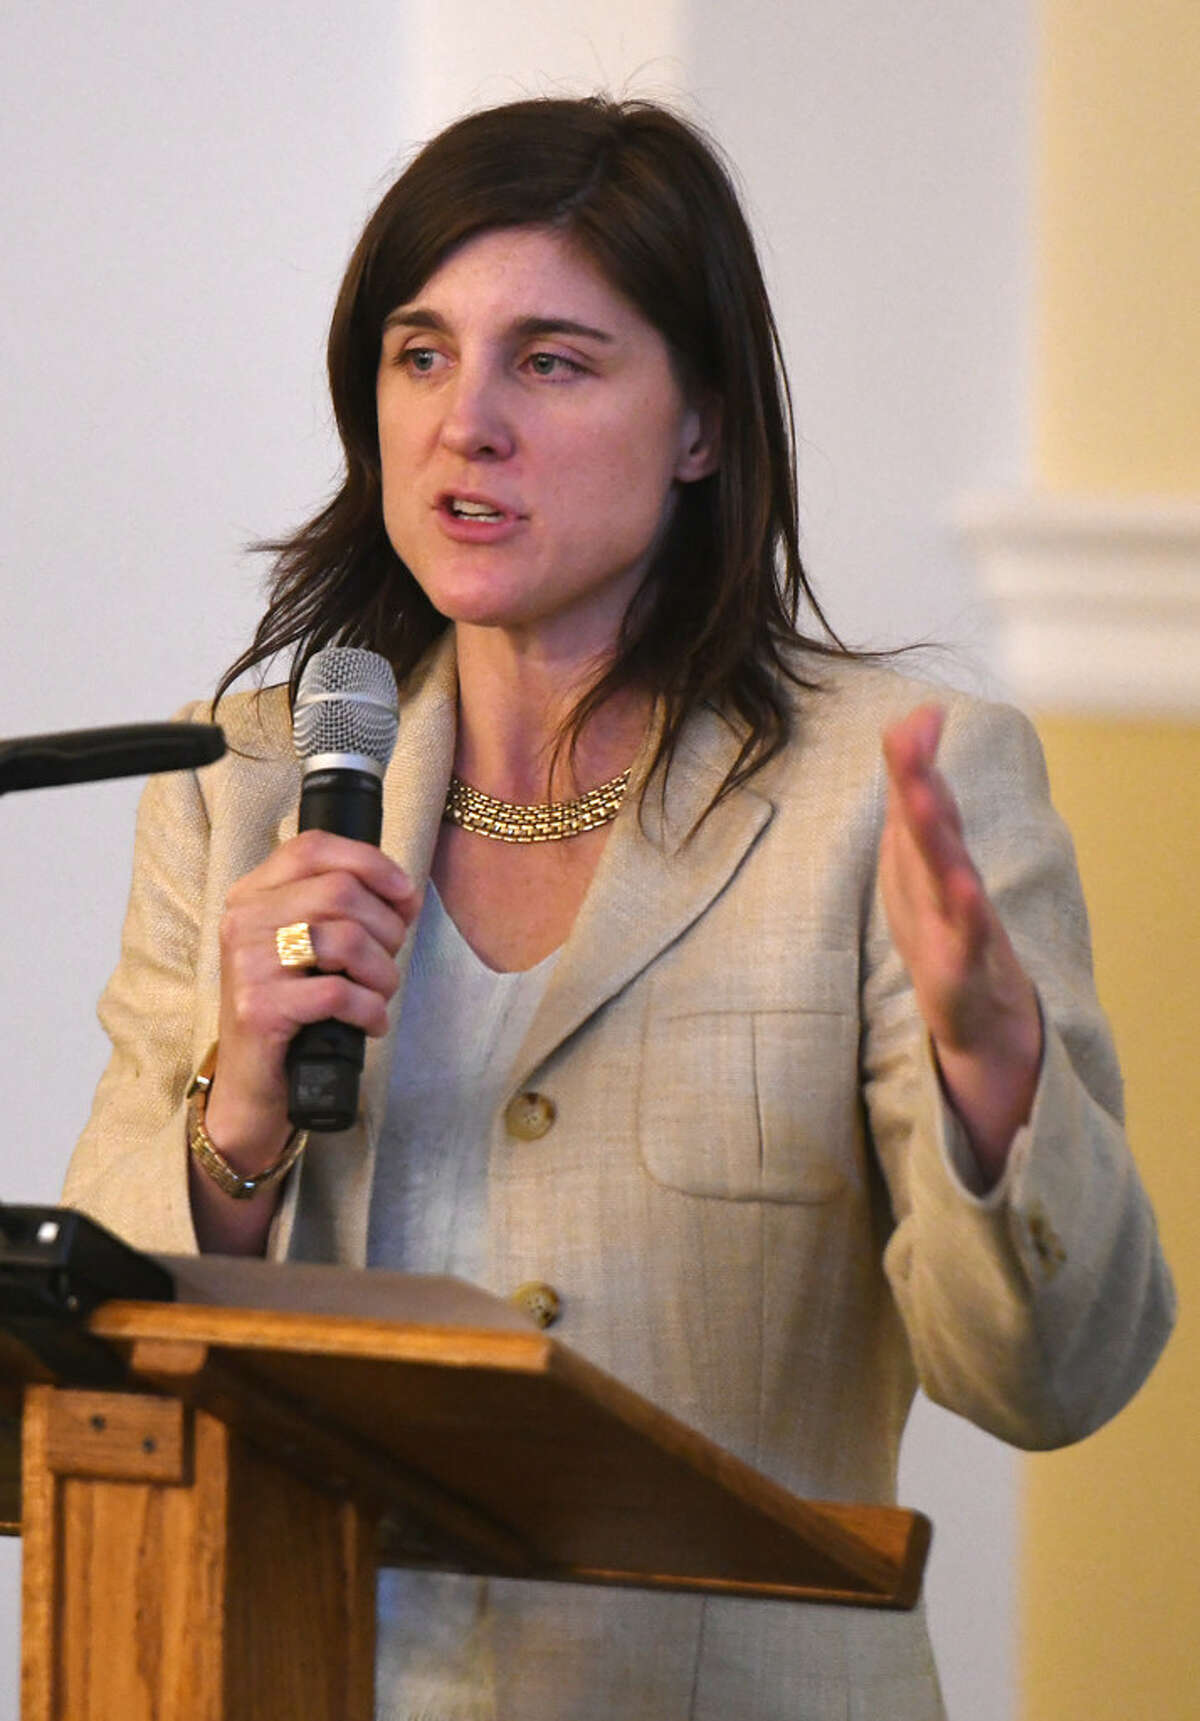 Greenwich's Director of Planning and Zoning Katie DeLuca has said she is leaving the position at the end of December. Applications are now being accepted for the open position.